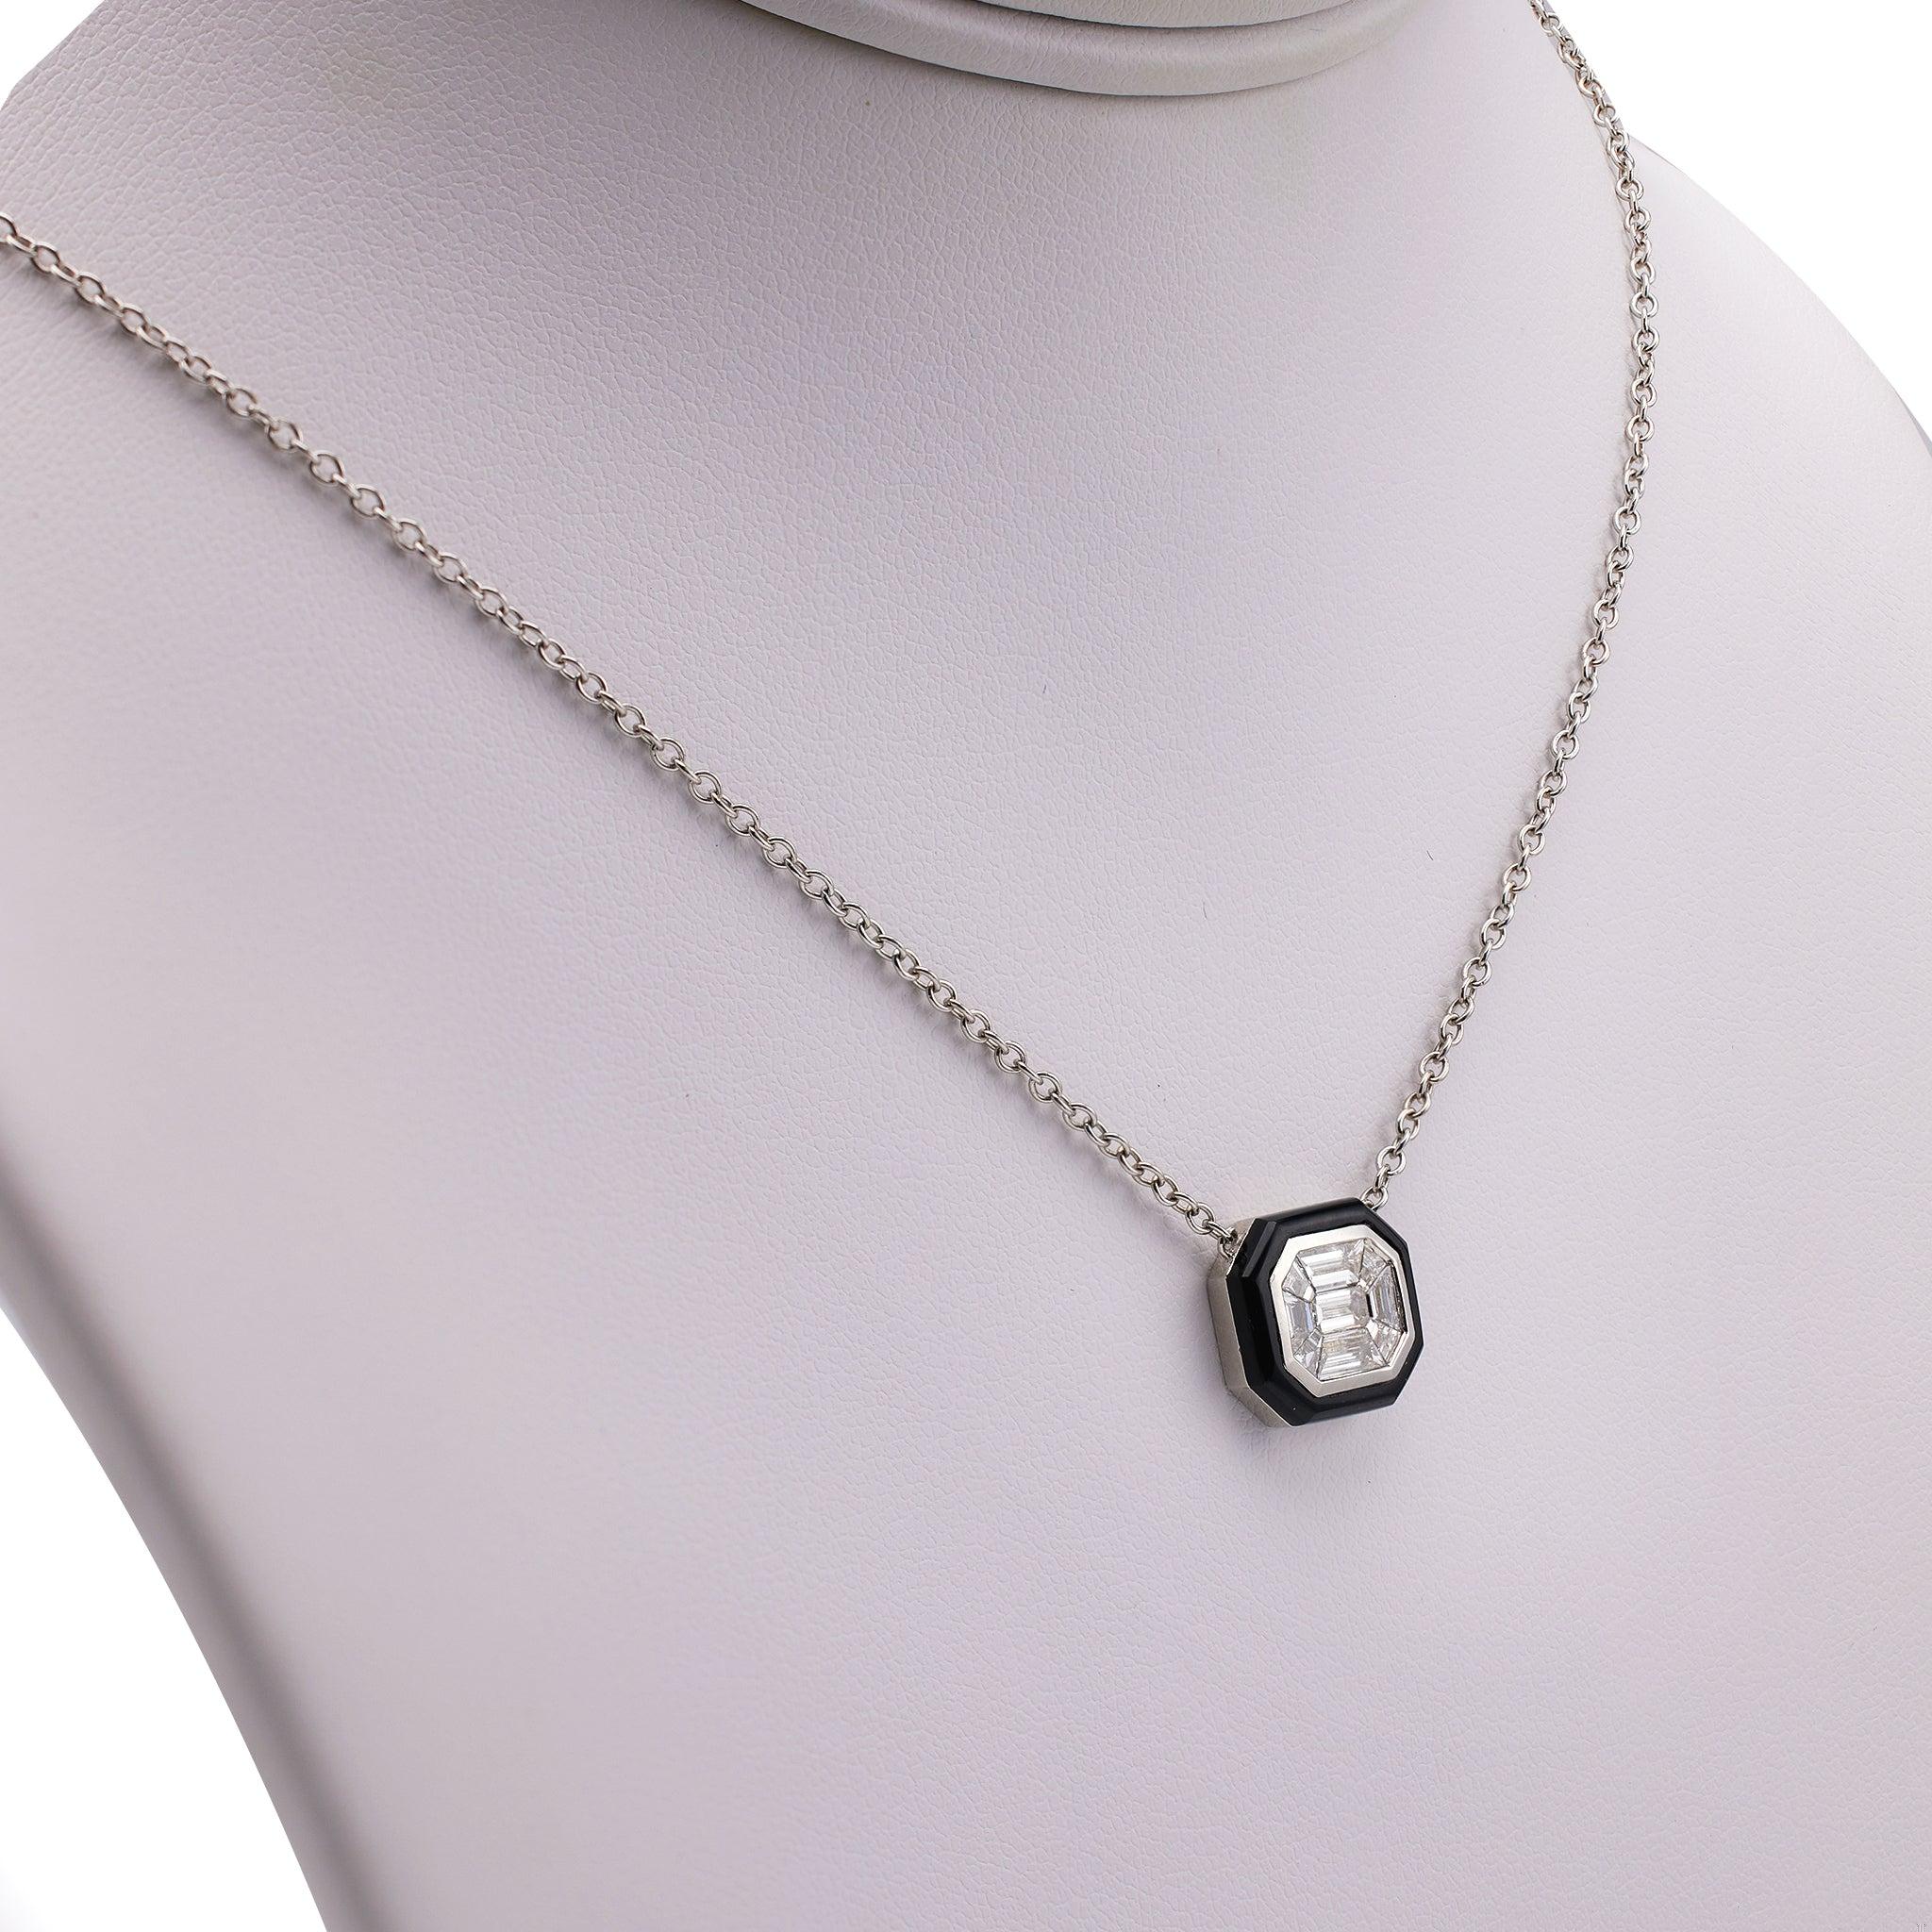 0.63 Carat Total Weight Diamond Onyx 18k White Gold Pendant Necklace  Jack Weir & Sons   